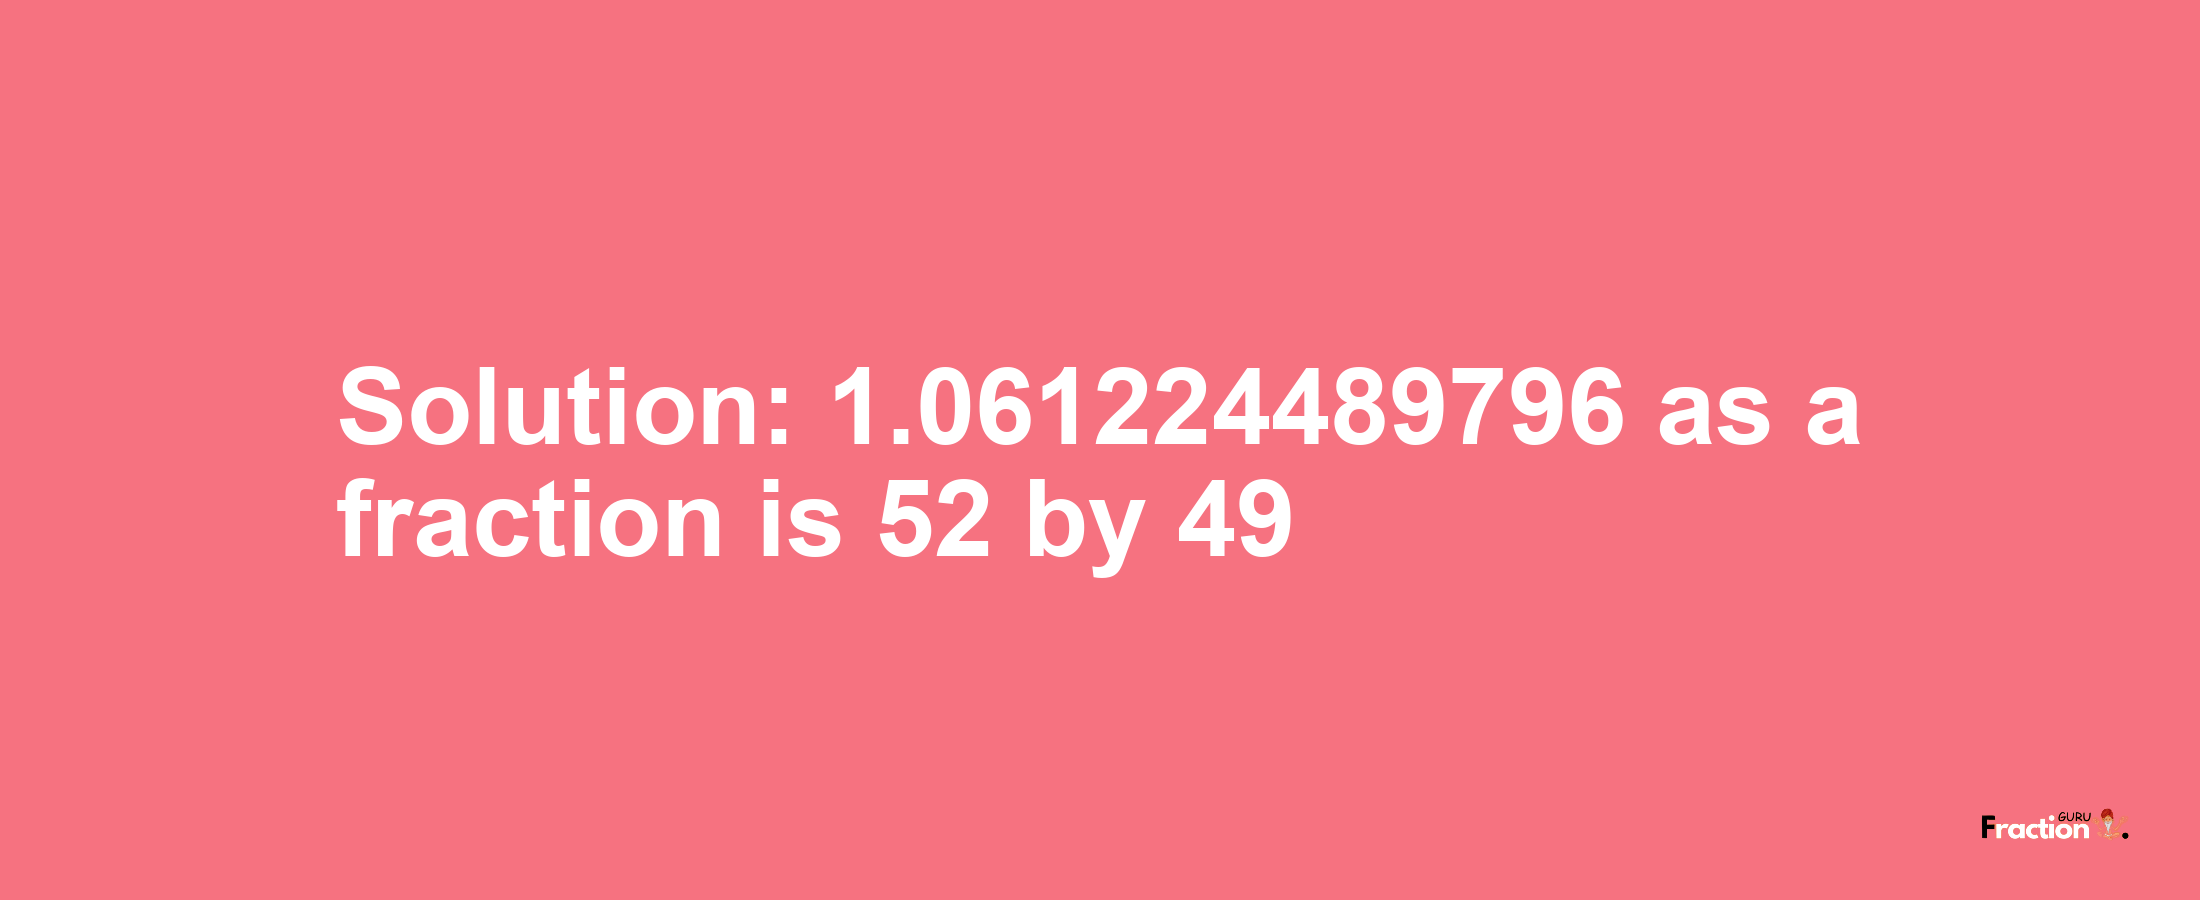 Solution:1.061224489796 as a fraction is 52/49